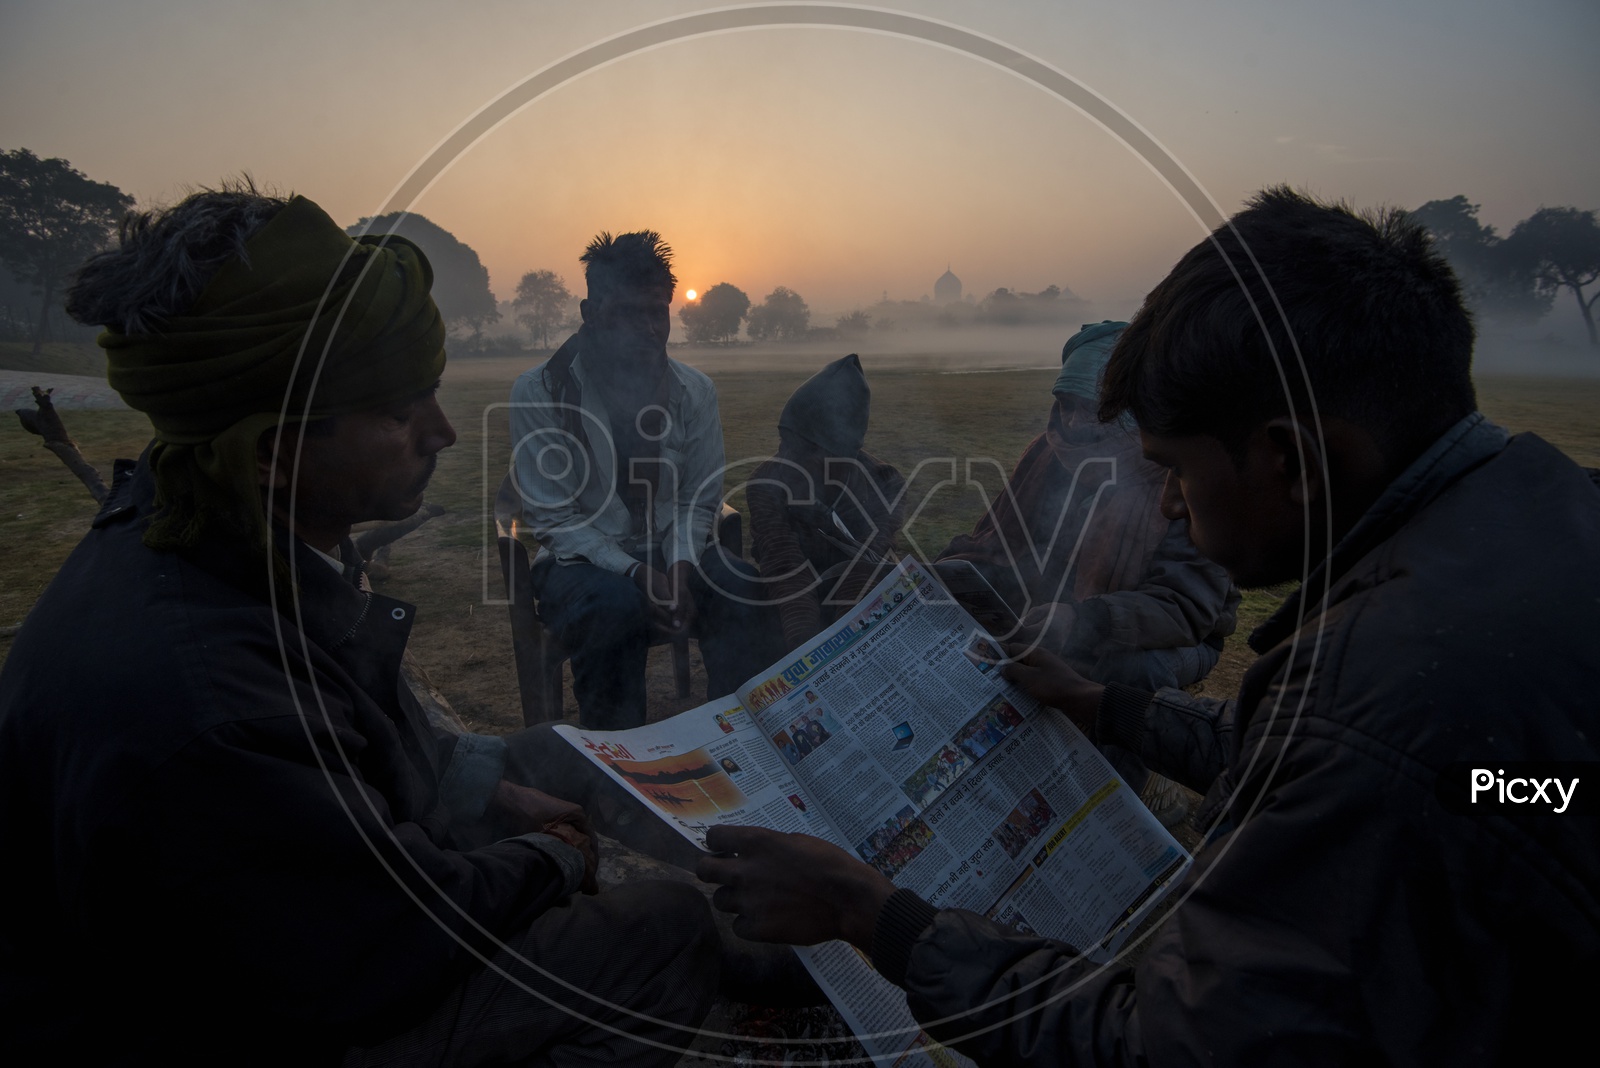 People reading News paper in Early Morning